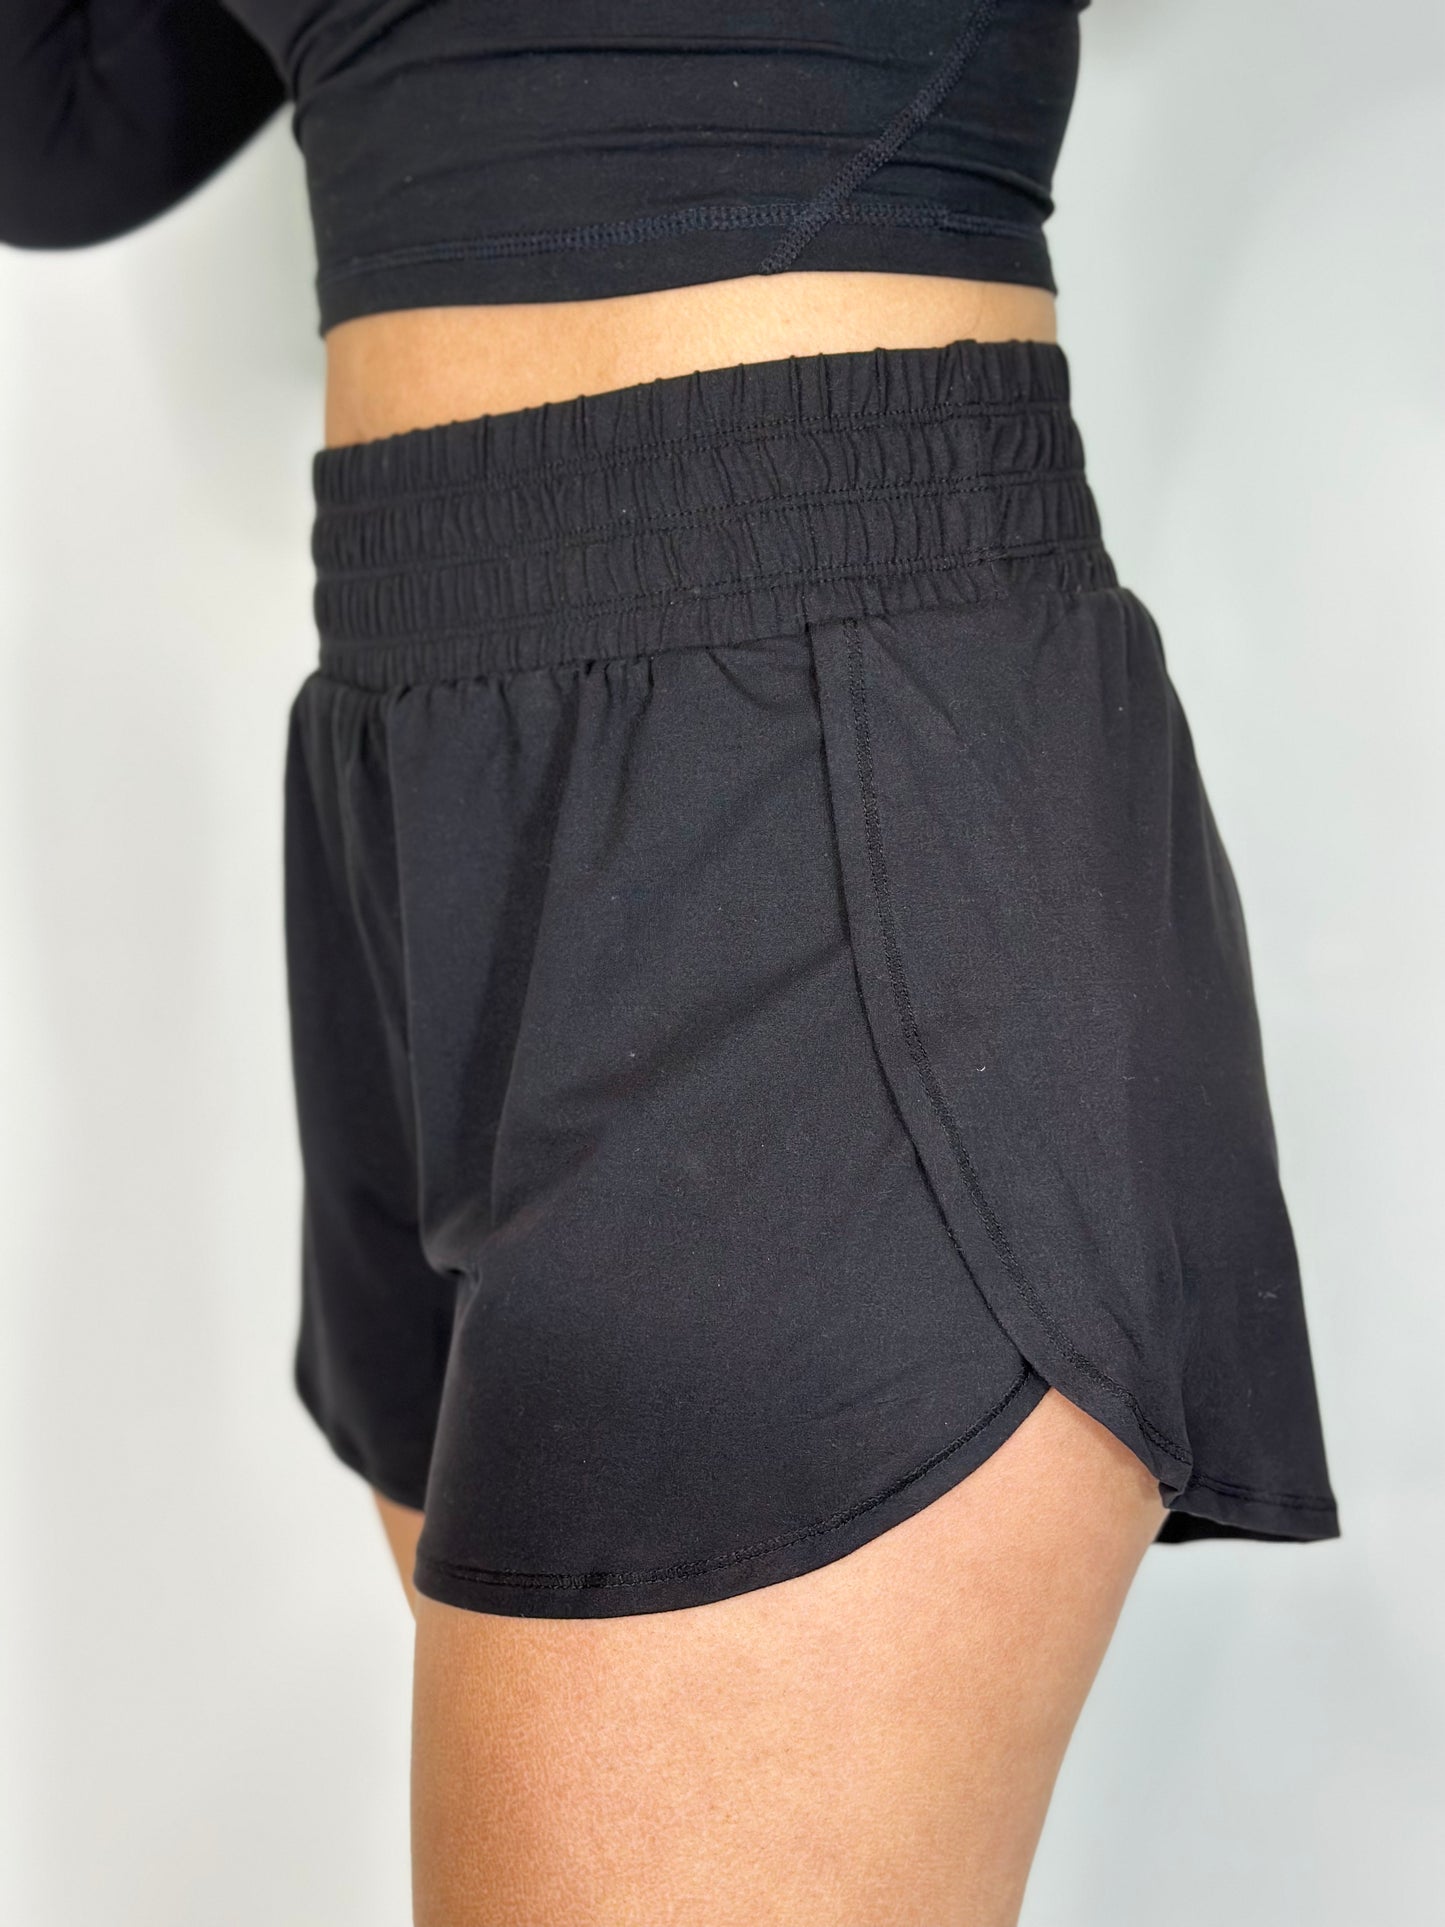 The Too Good Active Shorts